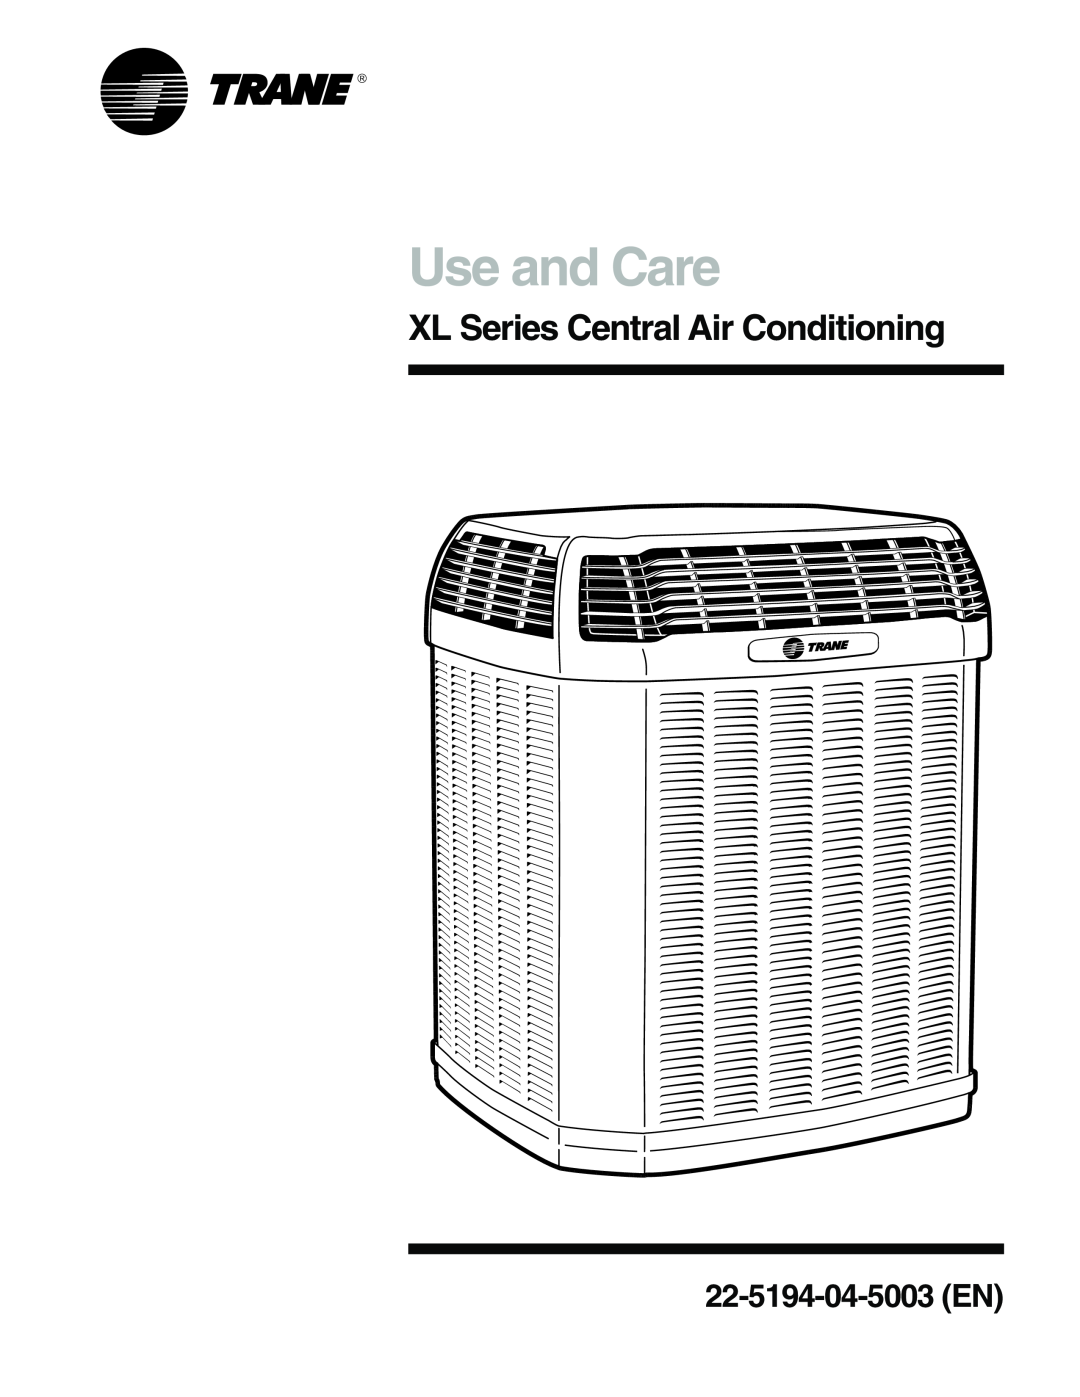 Trane 4TTX4, 4TTX6, 2TTX4, 2TTZ9, 4TTX3 manual XL Series Central Air Conditioning, Use and Care, 22-5194-04-5003EN 